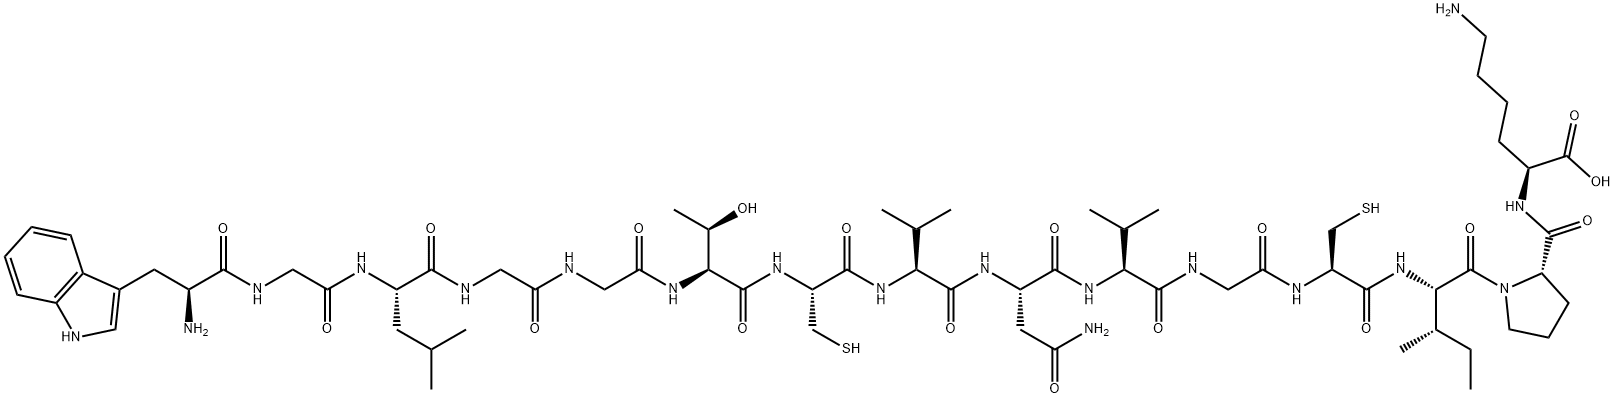 Thioredoxin reductase peptide Structure